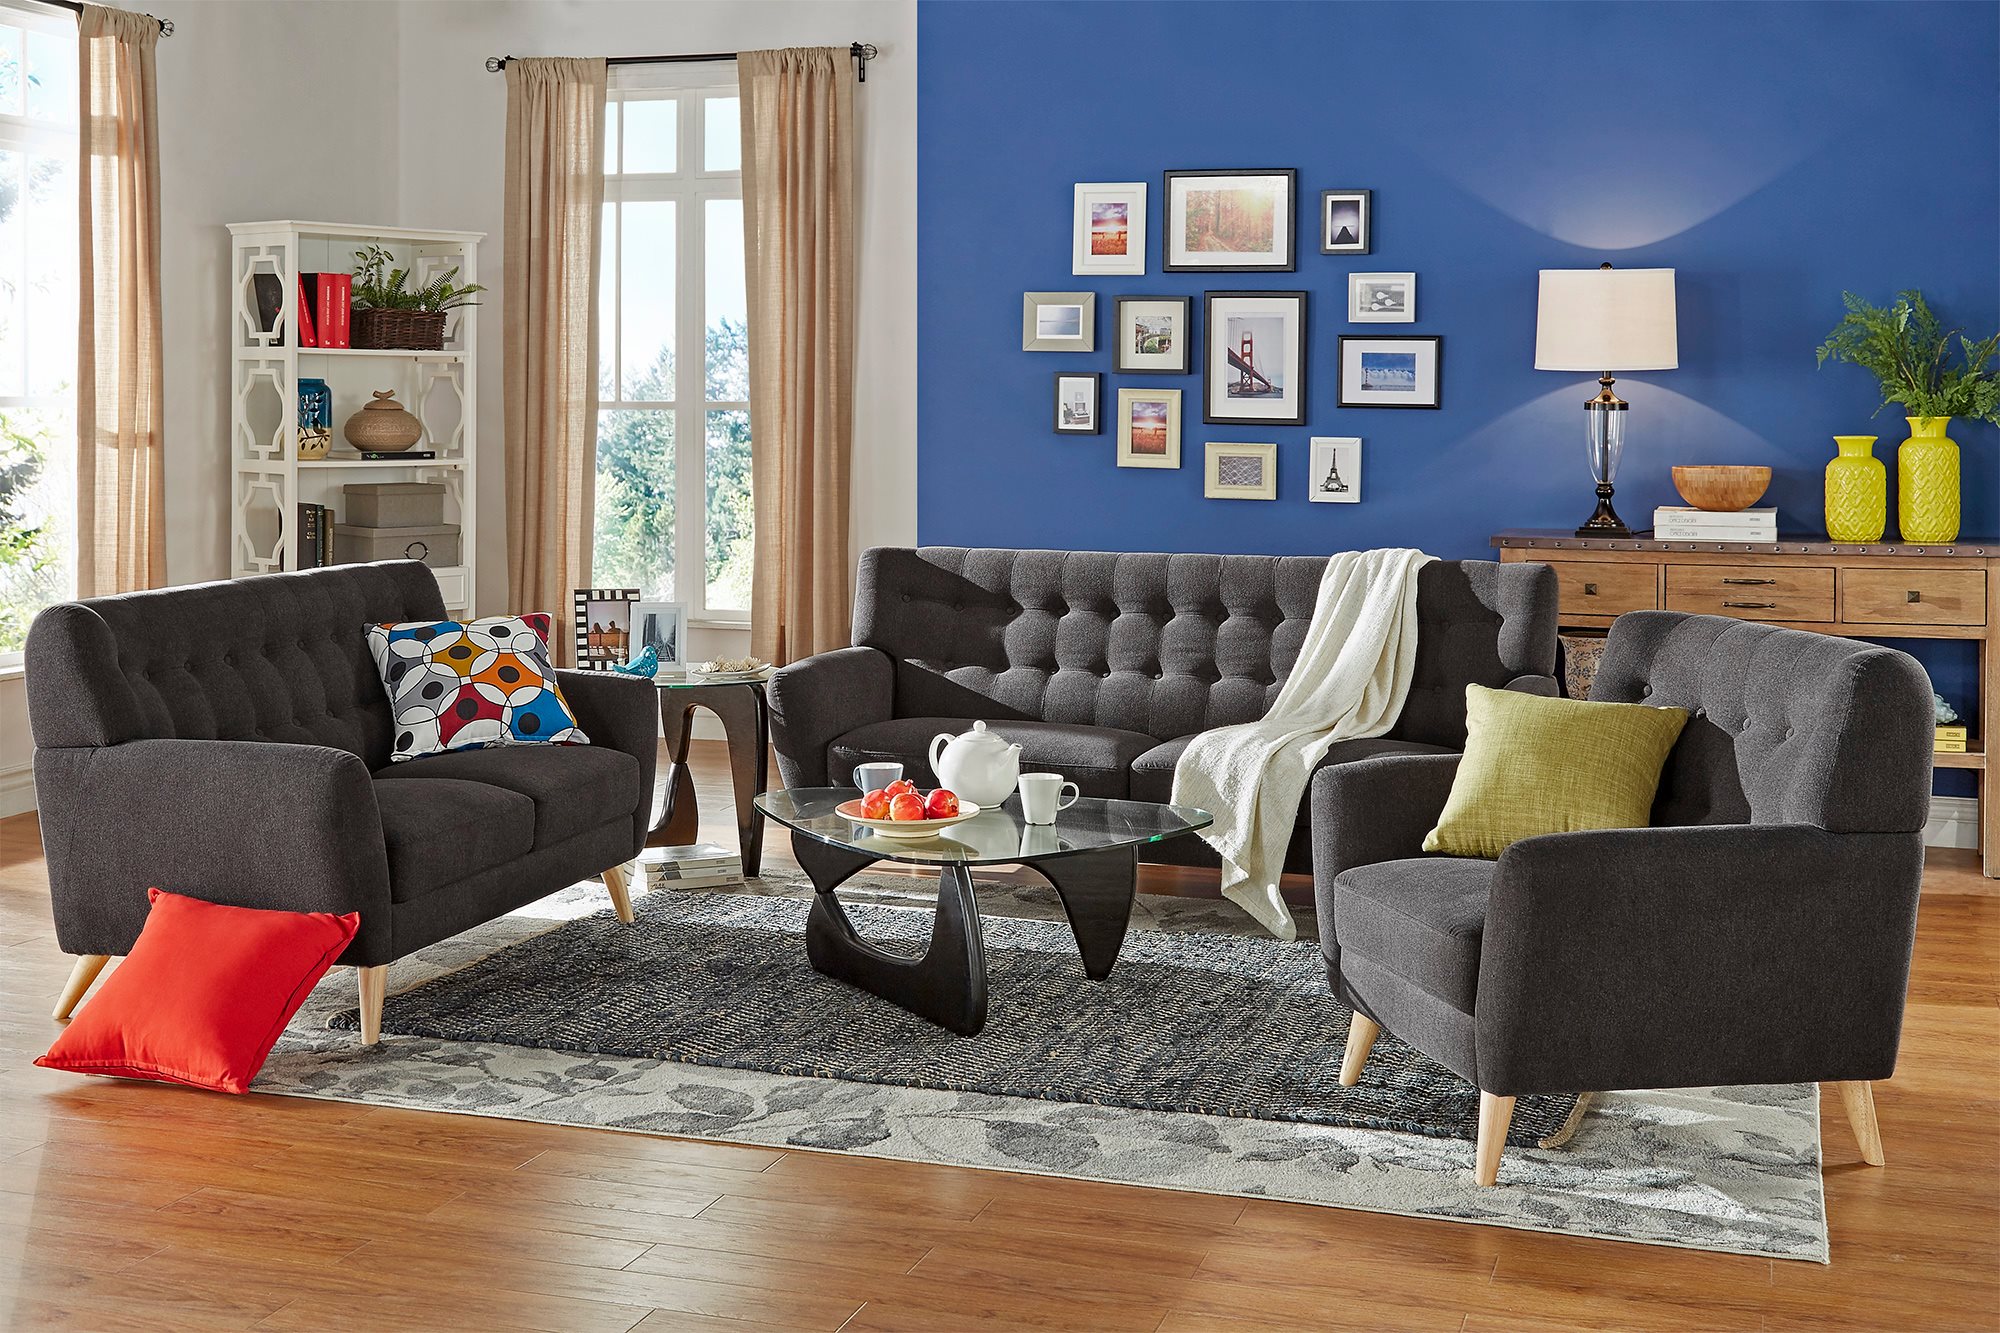 This is the last image for home design trends. It displays a mid-century modern themed living room. There is a sofa, loveseat, and accent chair with dark grey linen upholstery and natural finish peg feet. There are glass tables and colorful accent pillows.